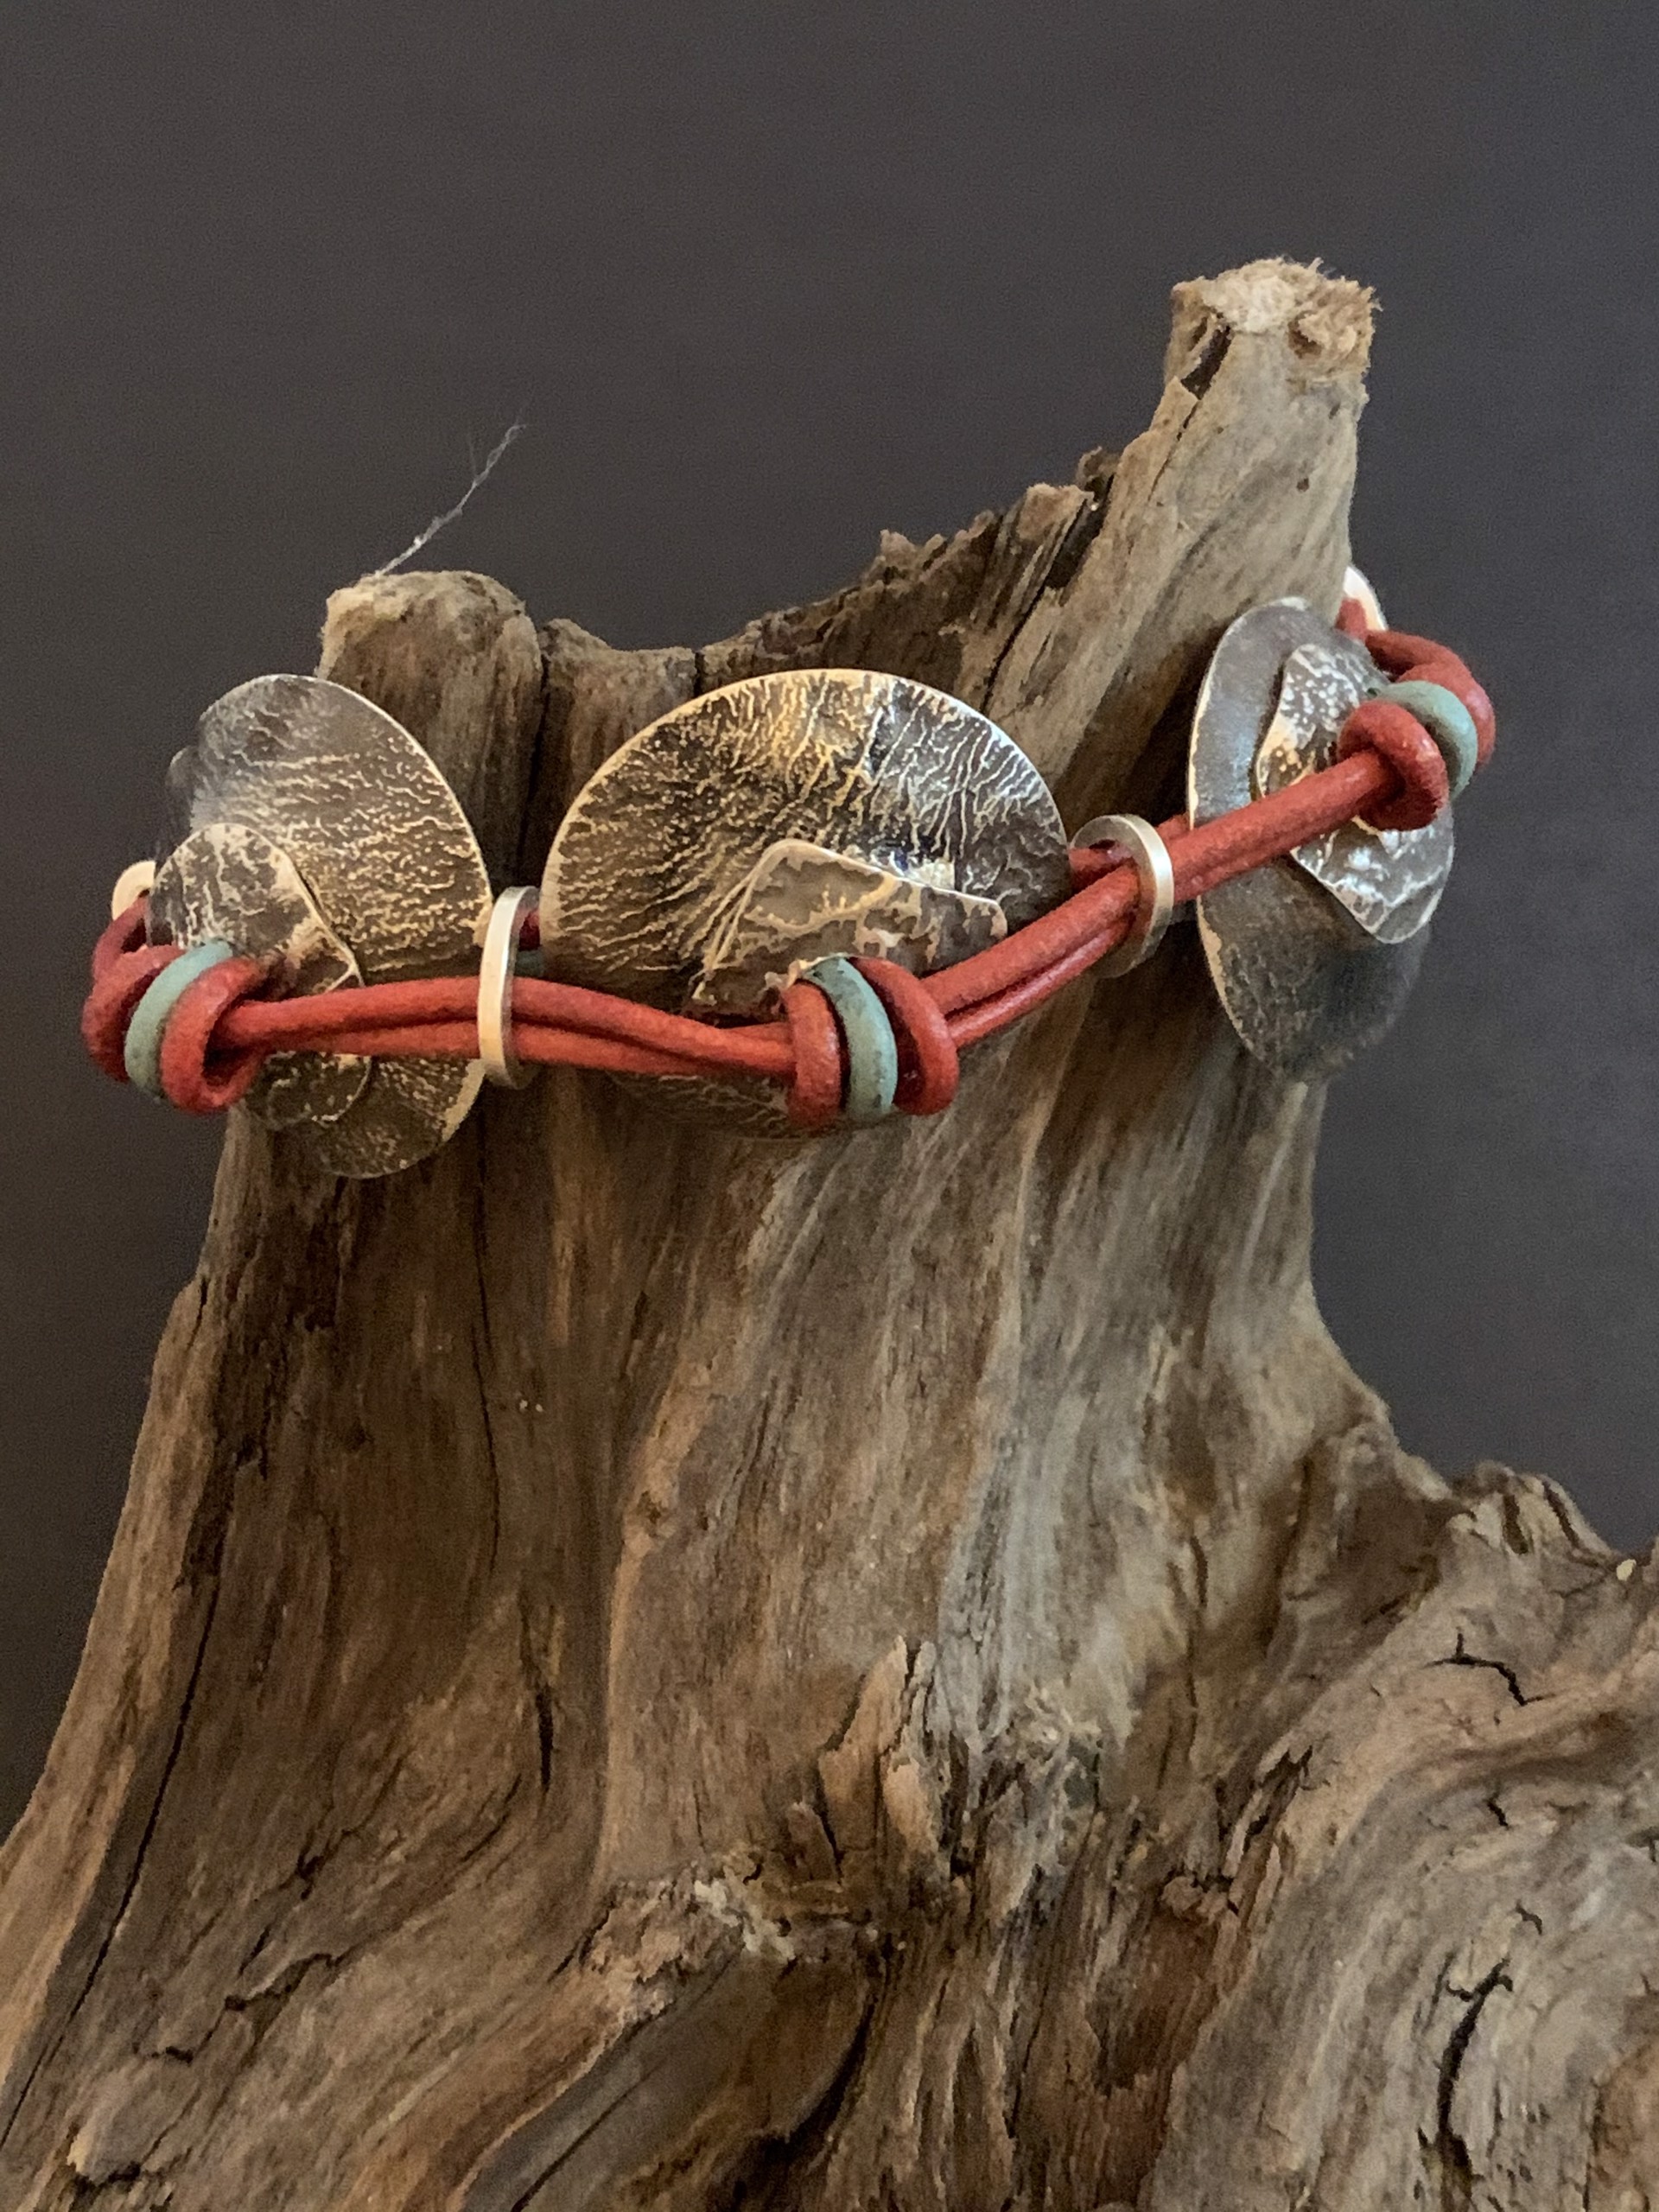 Bracelet - Sterling Silver, Knotted Leather With Magnetic Clasp AS 057 by Amy Soldin